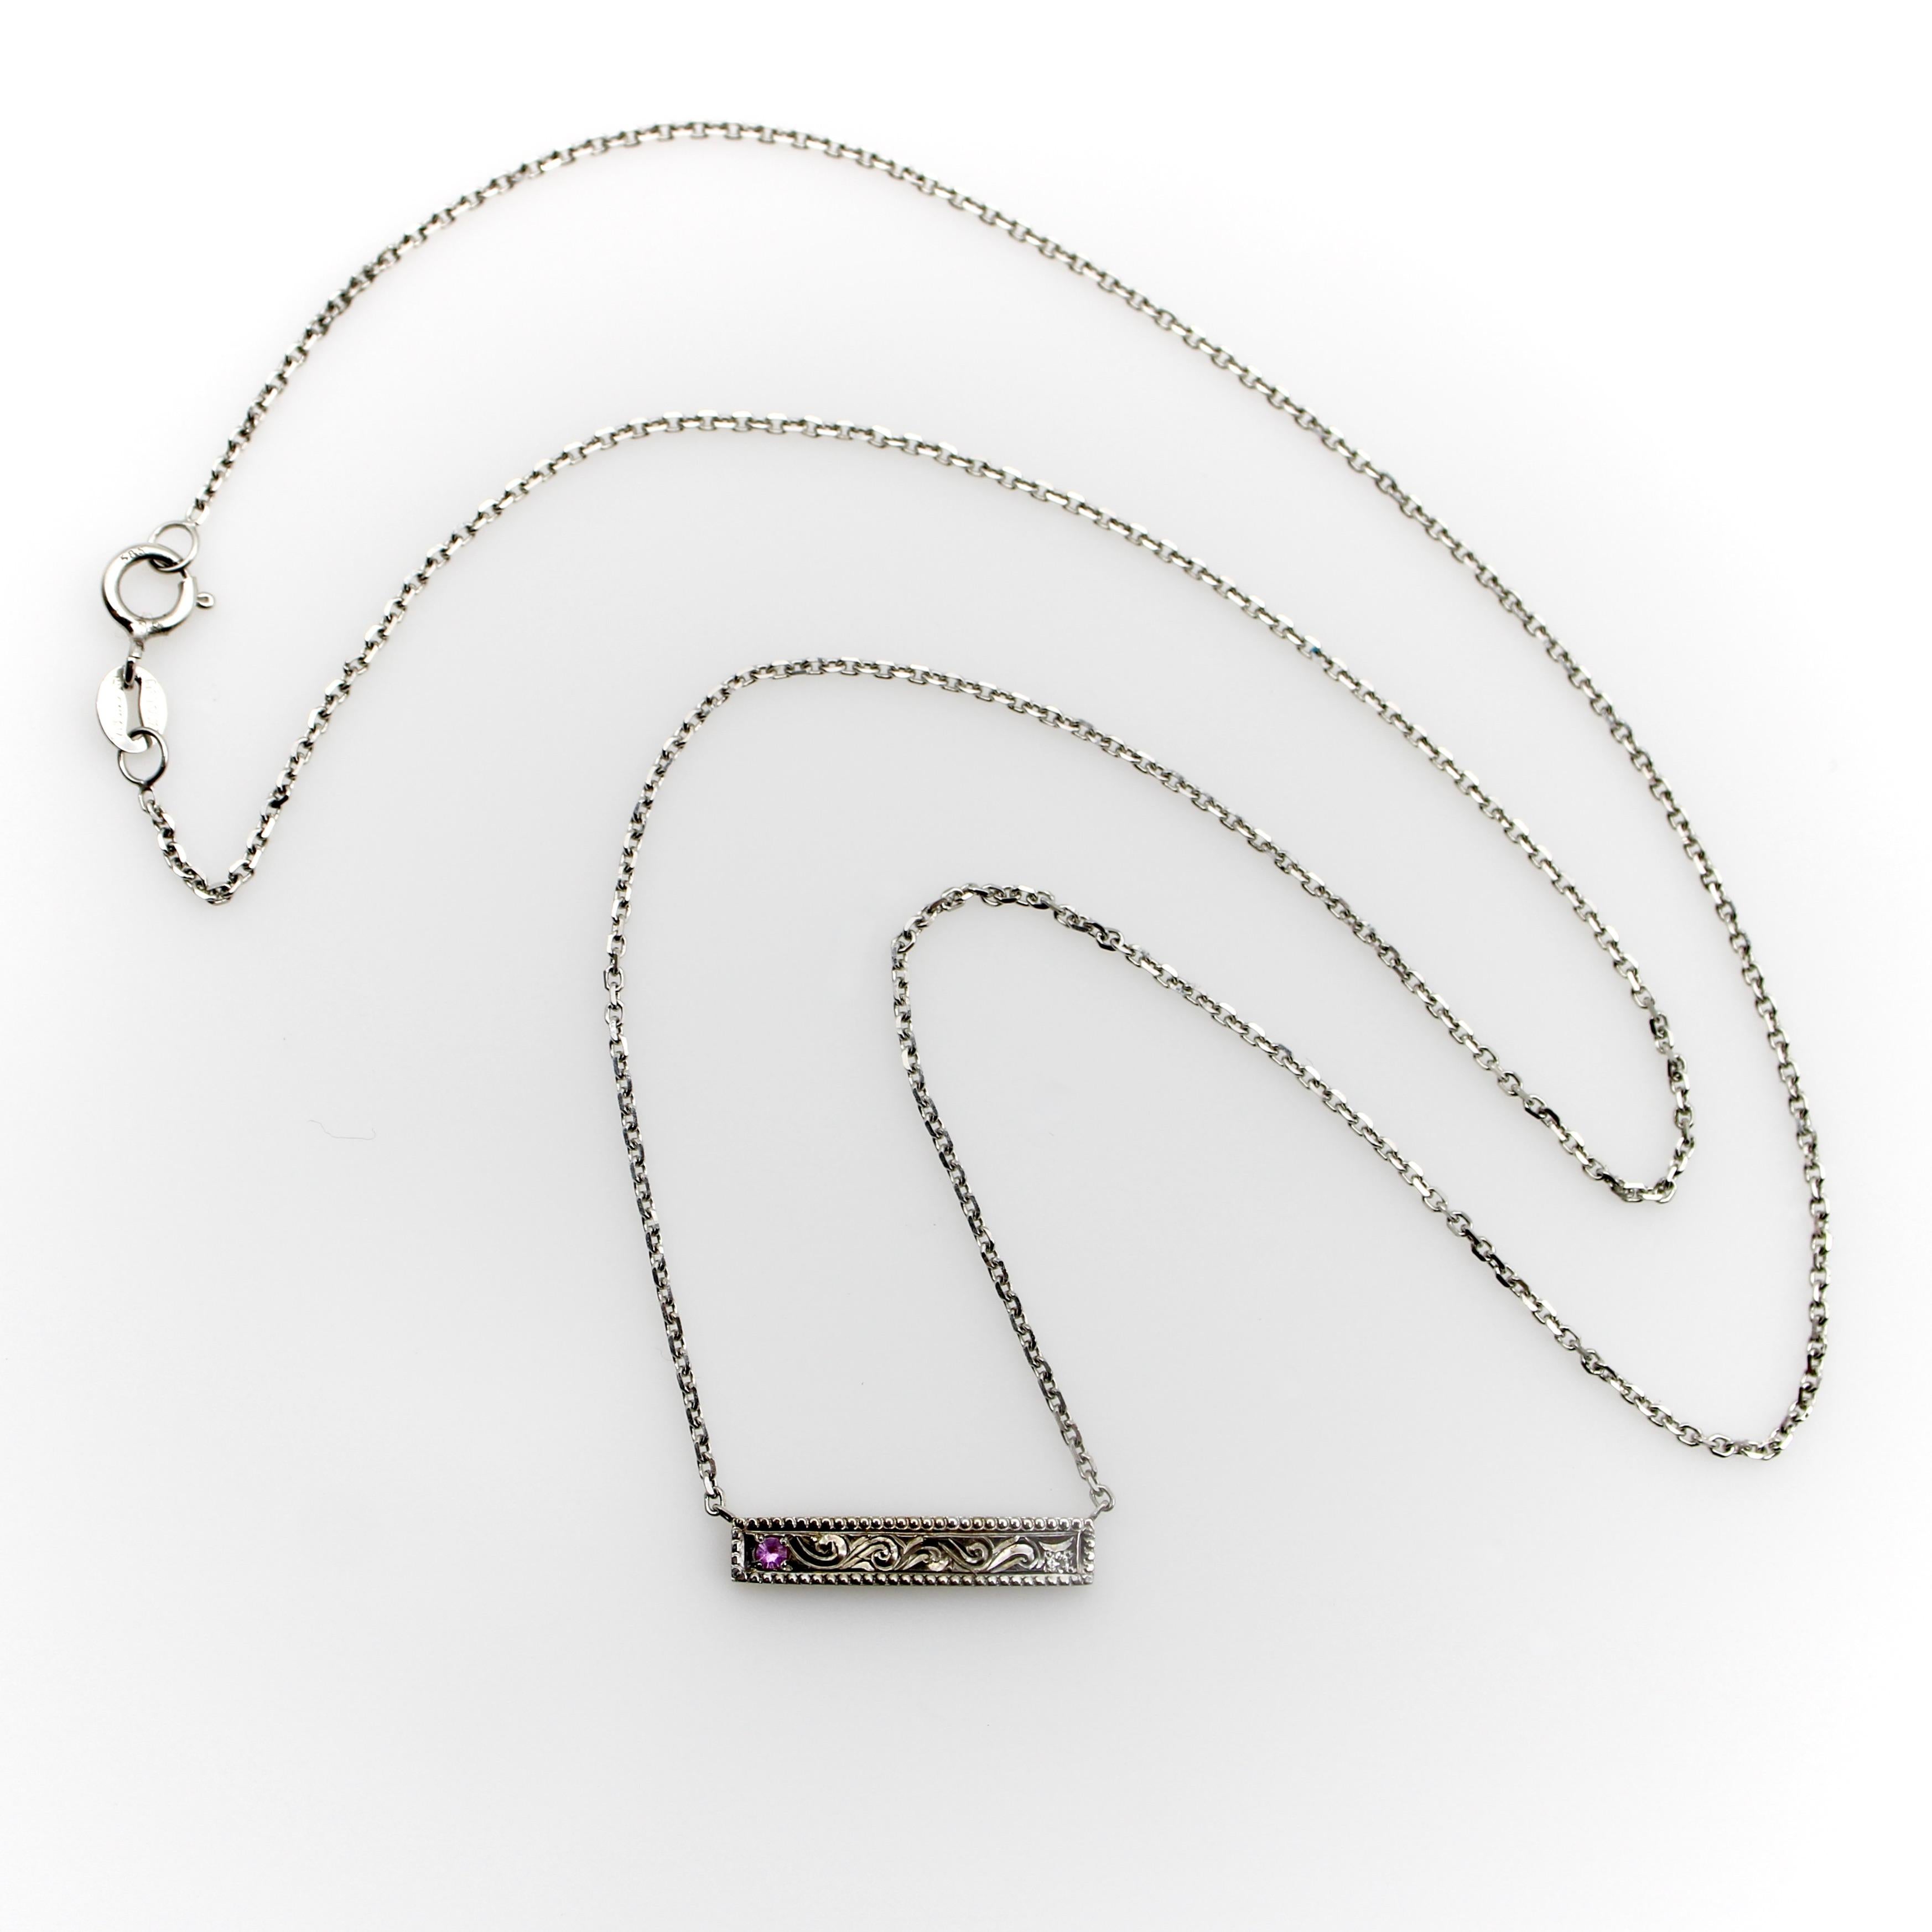 Contemporary 14K White Gold Bar Necklace with Diamond and Pink Tourmaline For Sale